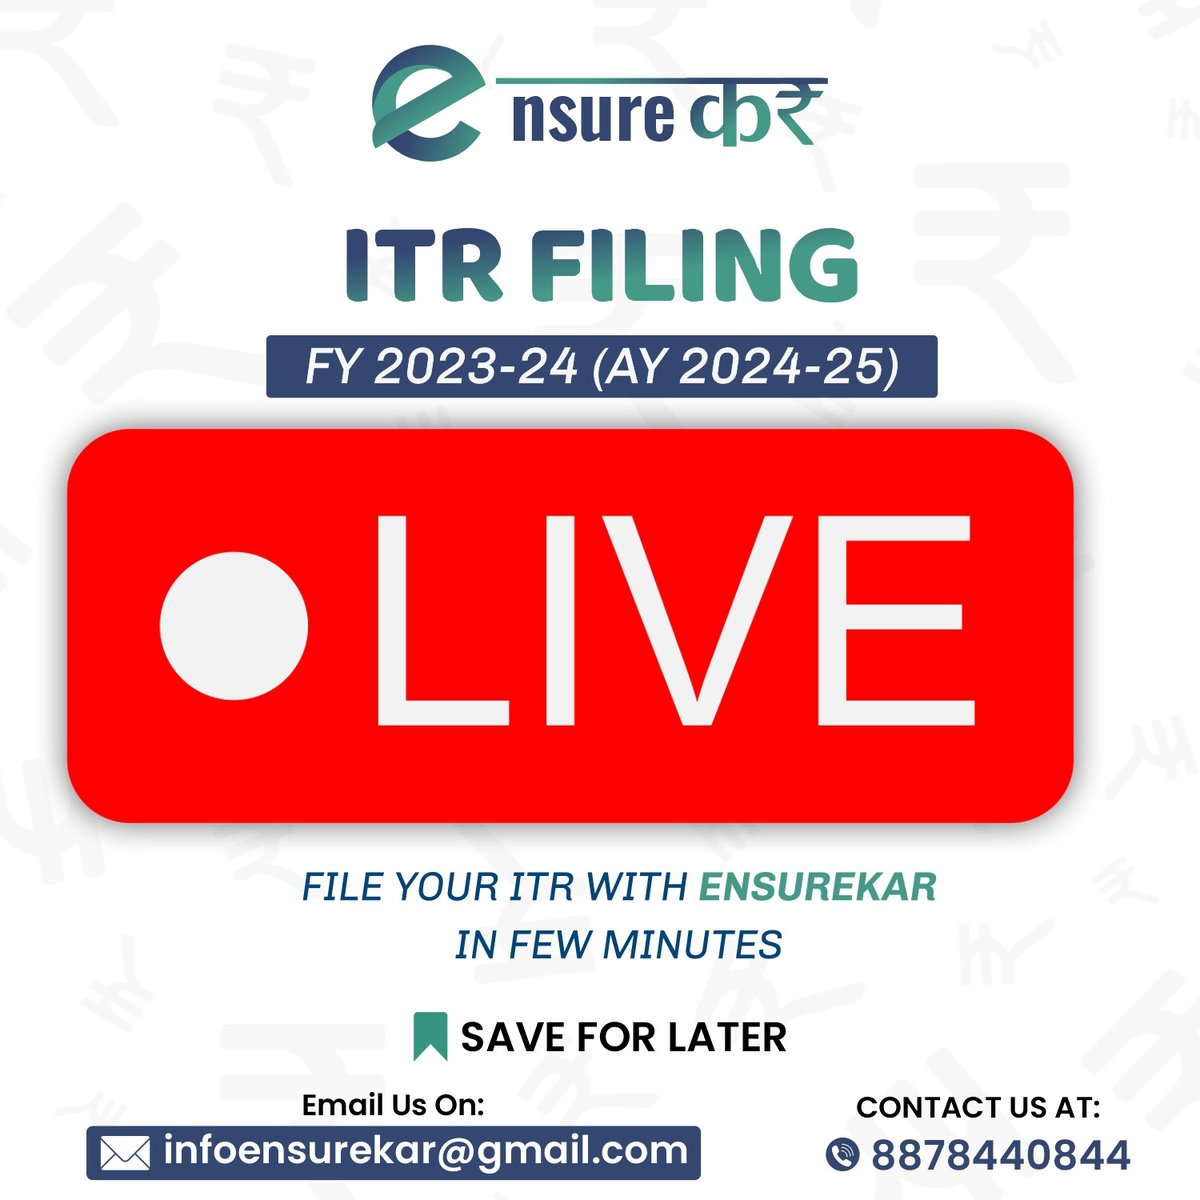 ITR Filing Blastoff! FY 2023-24 is here, and it's tax time! ⏰ Our user-friendly platform makes filing a smooth ride . Get started today & avoid the last-minute scramble! #incometax #income #itr #incometaxreturn #ensurekar #taxday